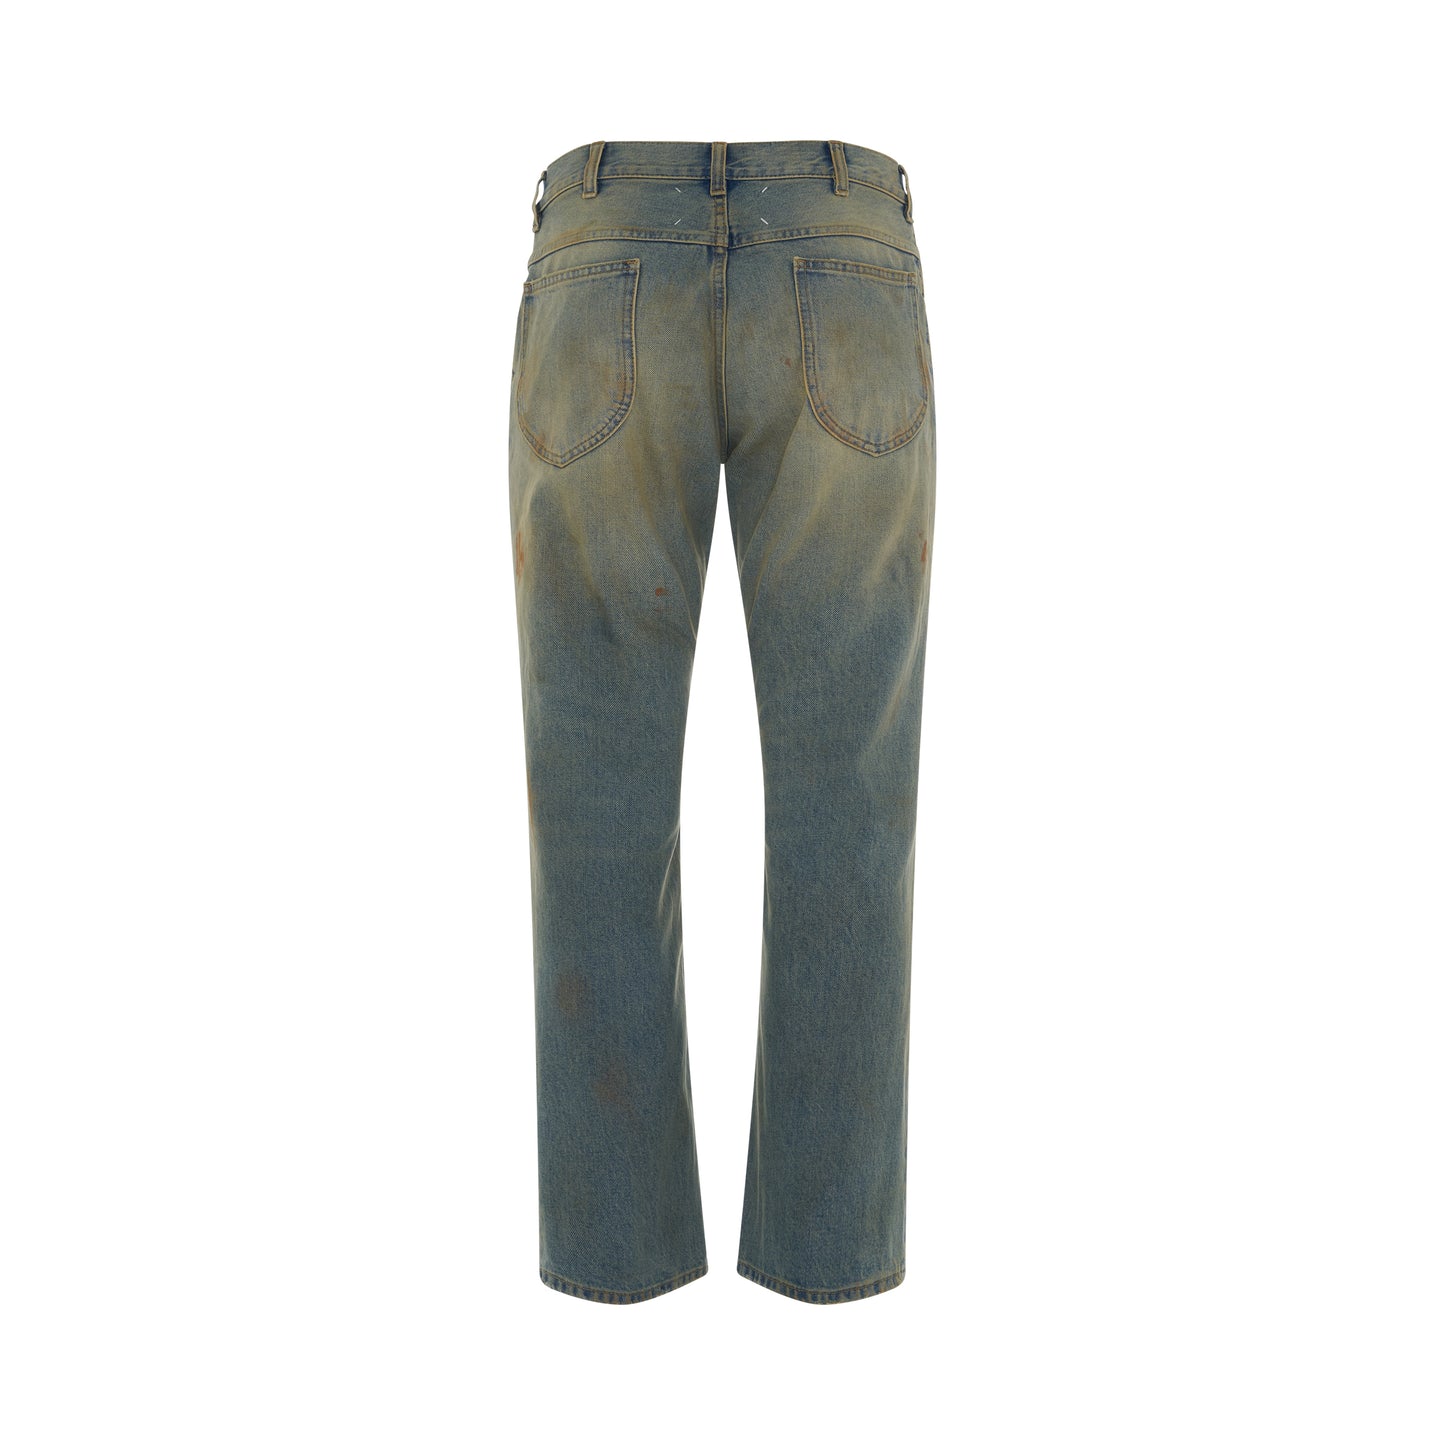 5 Pockets Straight Leg Jeans in Dirty Wash